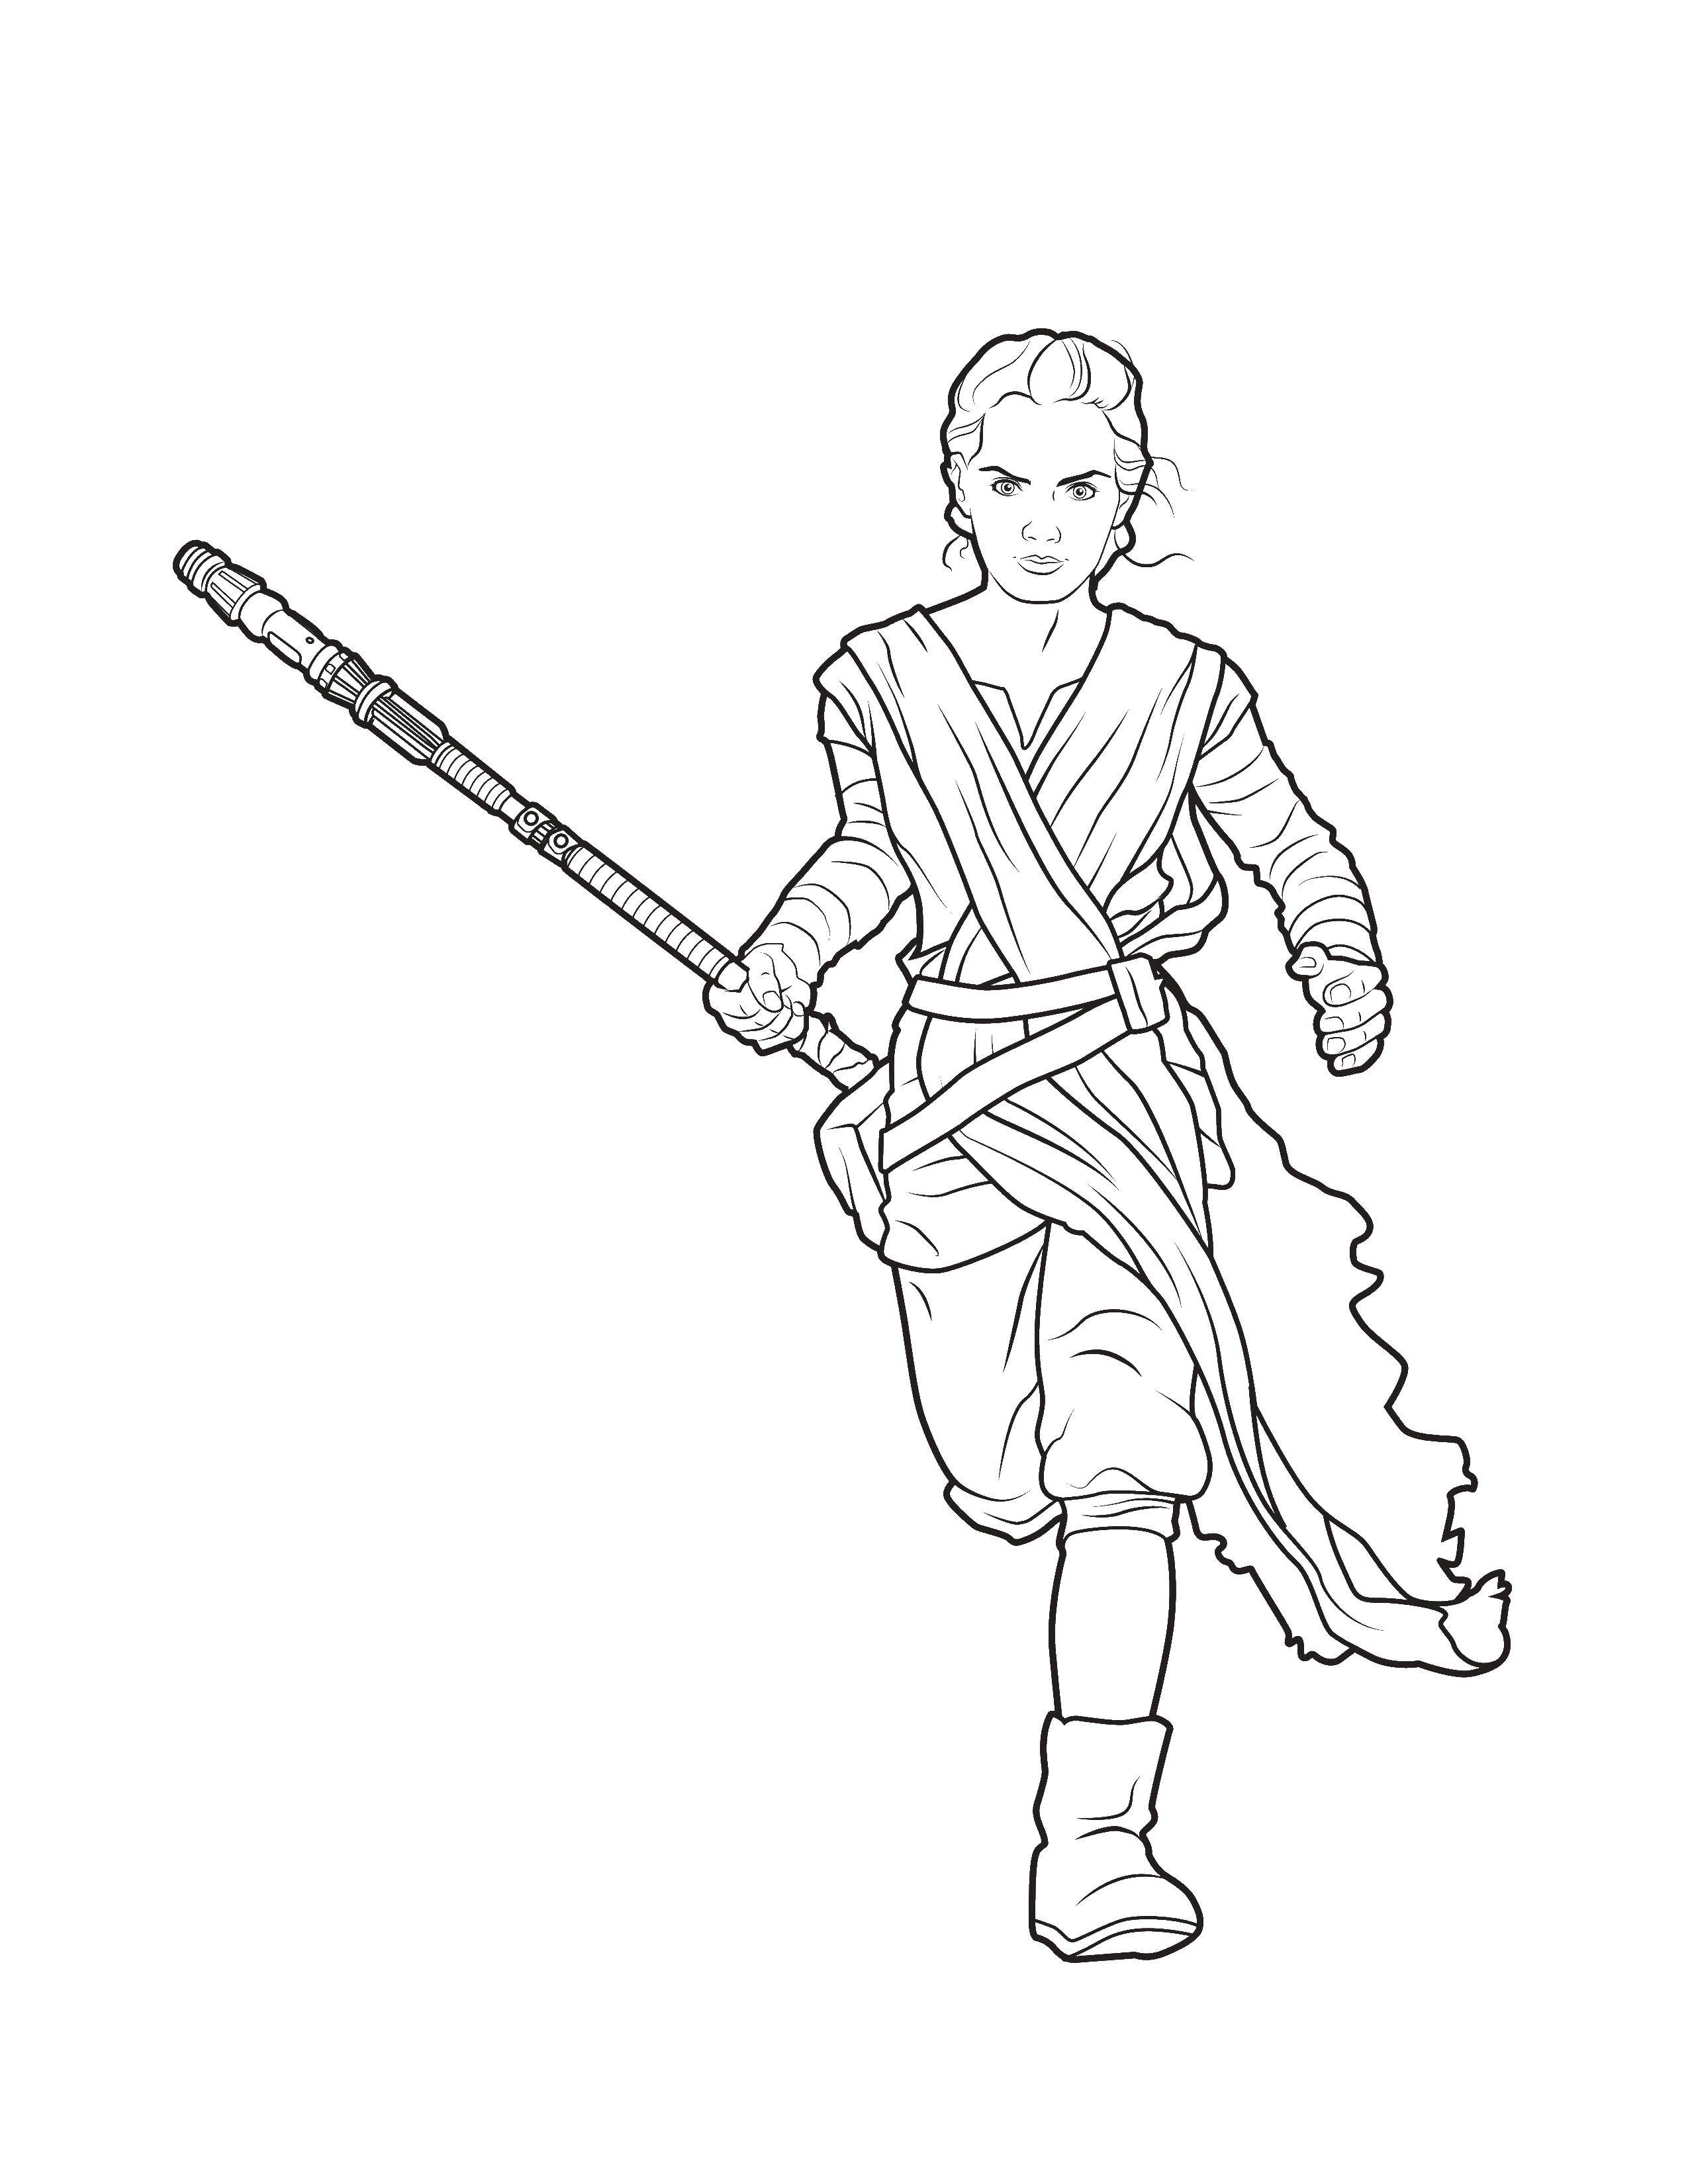 Coloring Ray. Category star wars . Tags:  Ray, star wars.